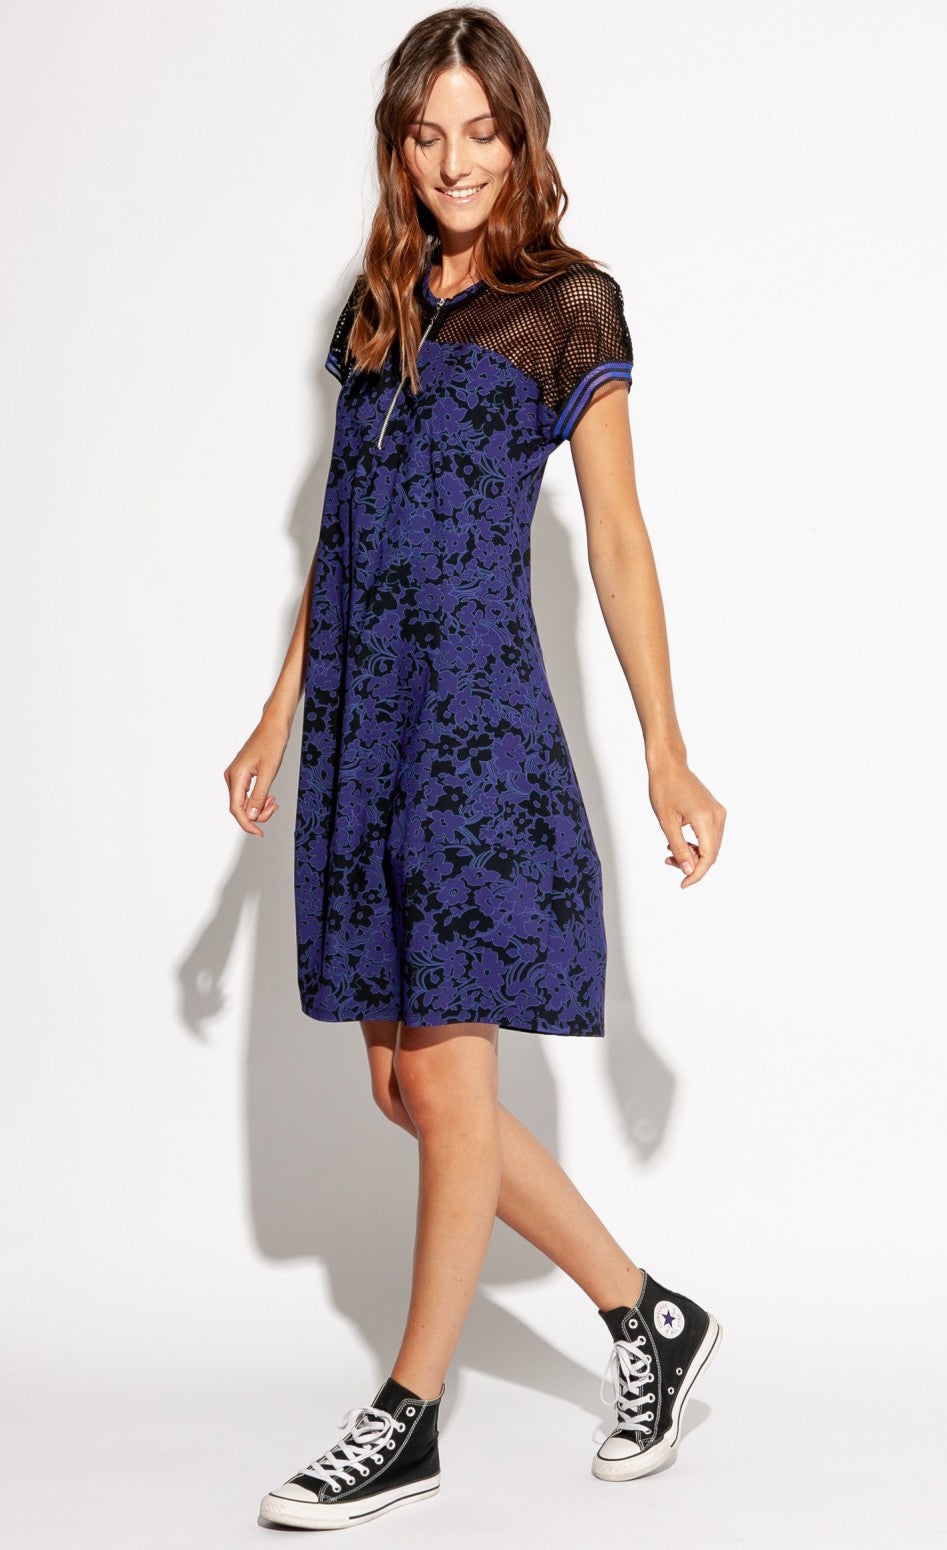 Front left sided full body view of a woman wearing the Indies Skipy Dress. This dress is indigo blue and black with a floral print and black mesh on the shoulders and short sleeves. The dress is loose fitting with a slightly fitted waist and a cut that sits above the knees.